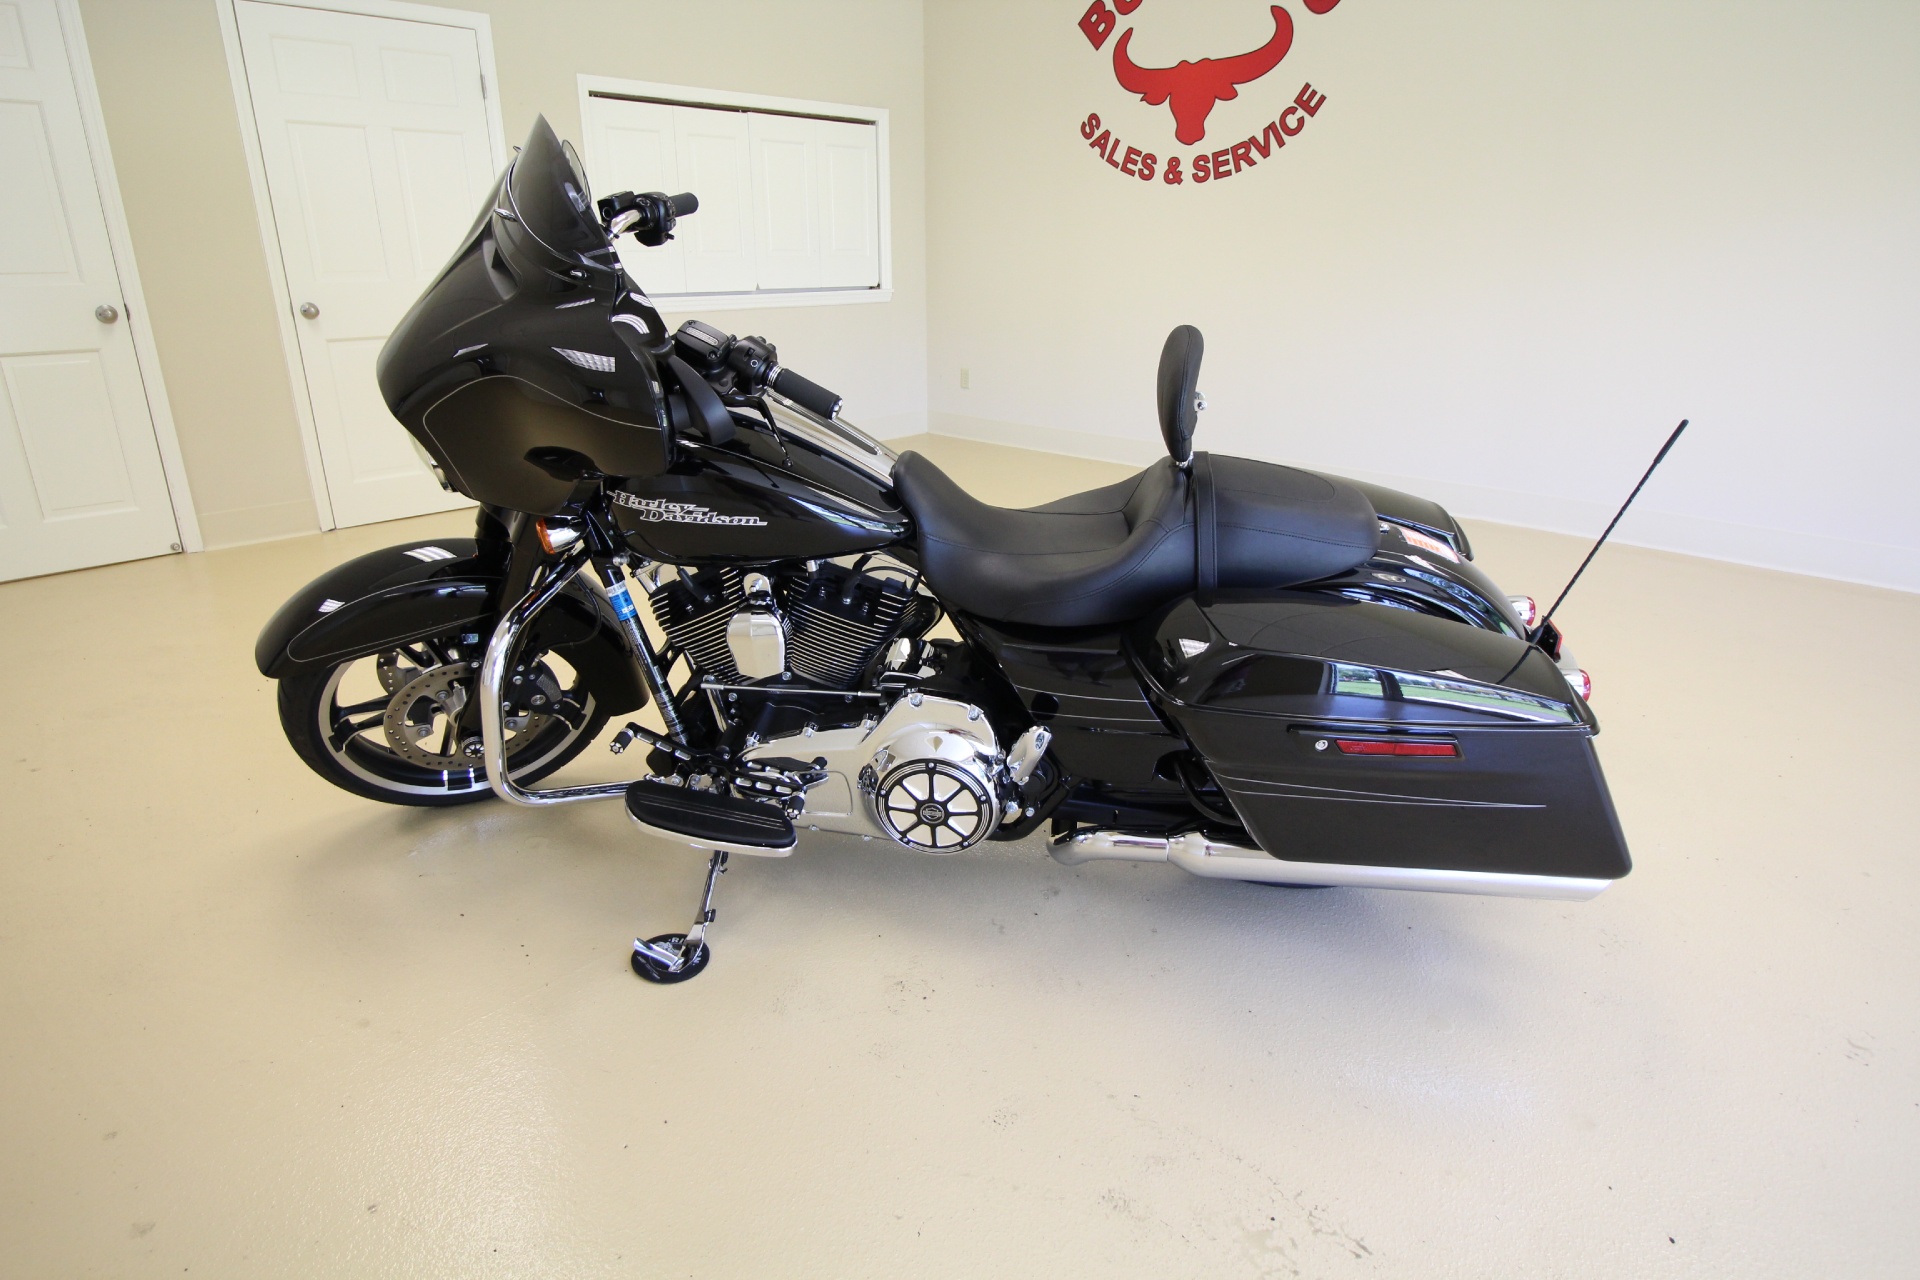 2016 Harley Davidson Streetglide Like New Navigation Color Screen Bluetooth 4000 In Upgrades Stock 16171 For Sale Near Albany Ny Ny Harley Davidson Dealer For Sale In Albany Ny 16171 Bul Auto Sales